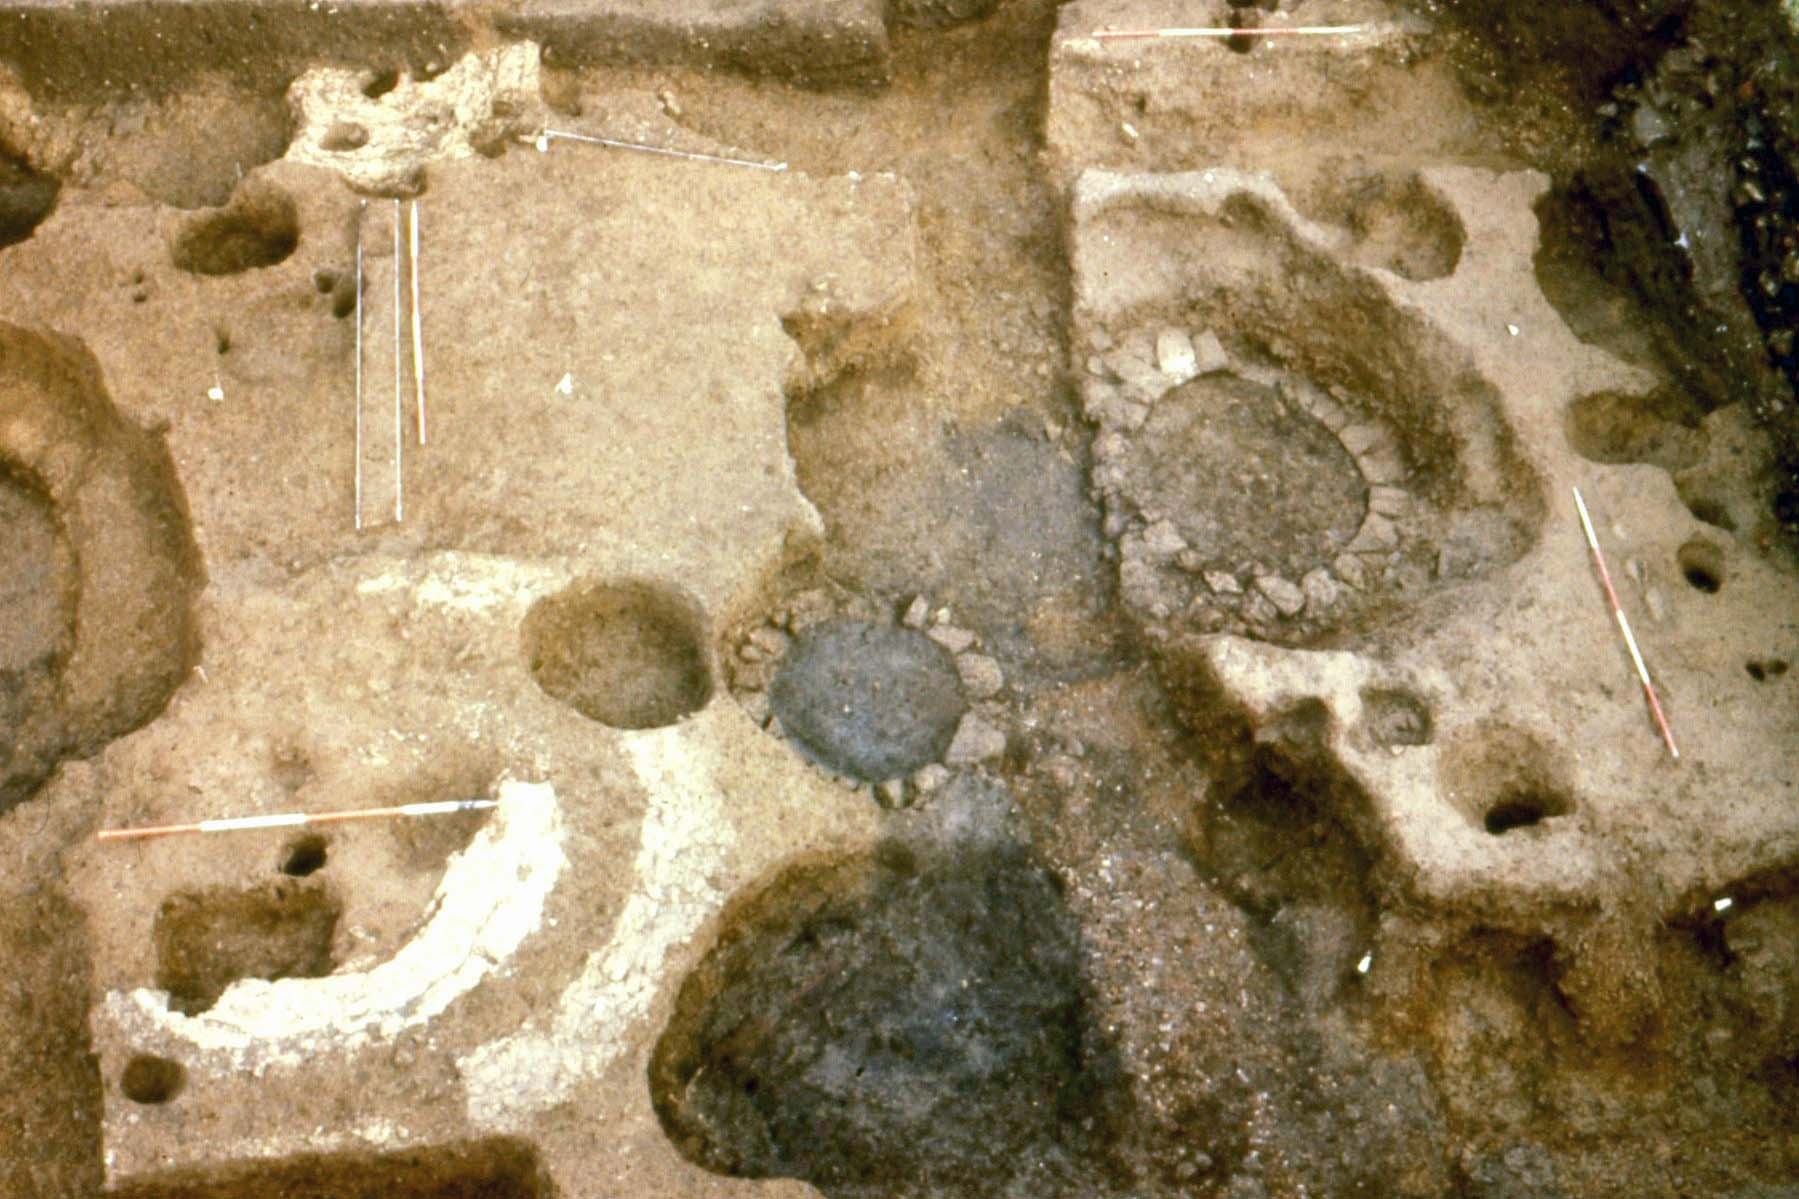 A photograph of an archaeological excavation, showing two circular structures with stone foundations.